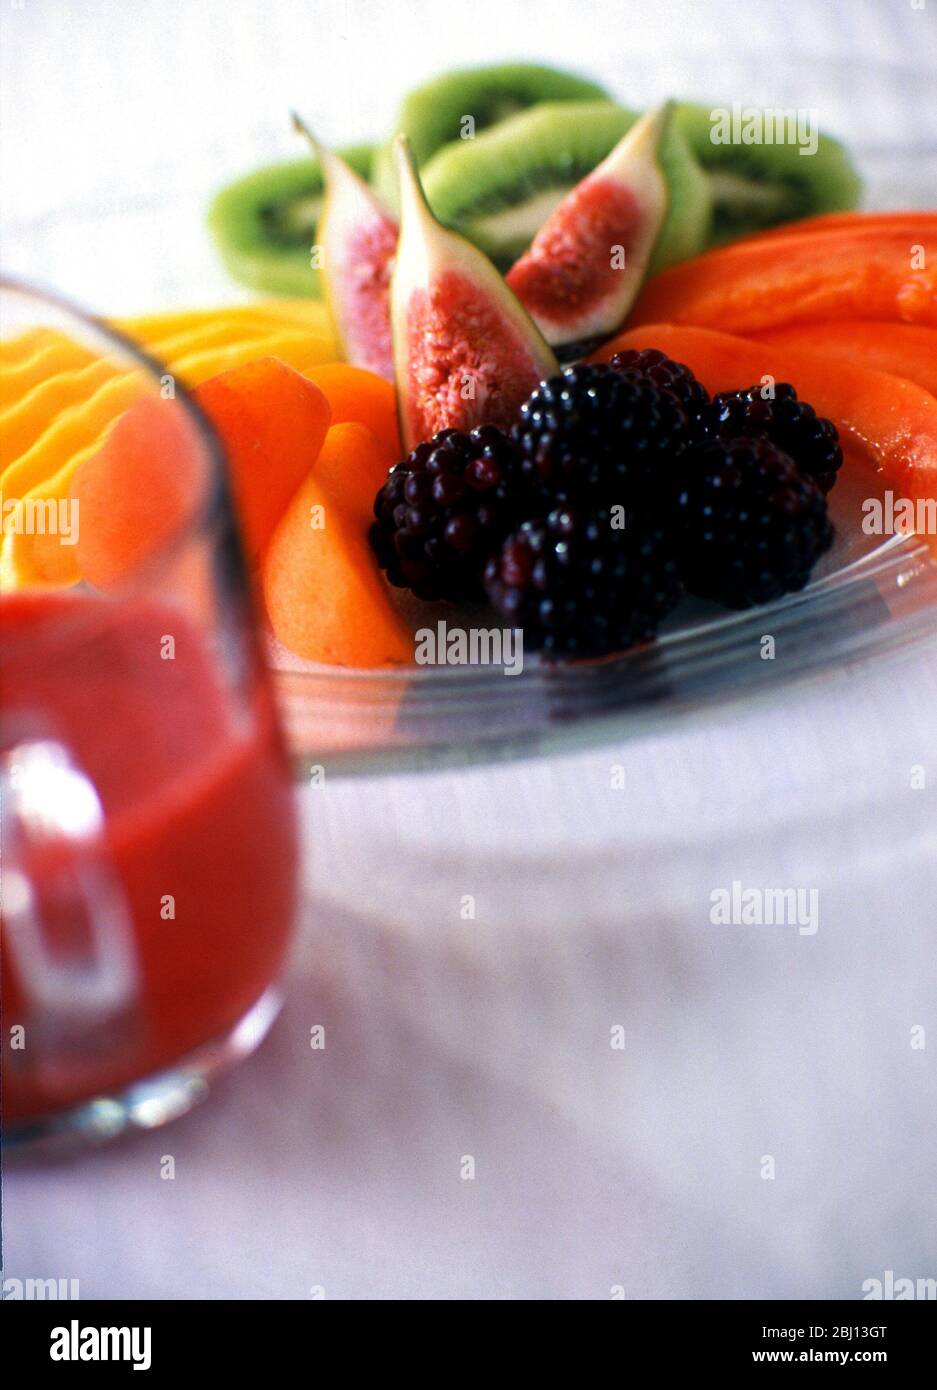 Attractively arranged cut and prepared fruit on glass plate, served as dessert - Stock Photo